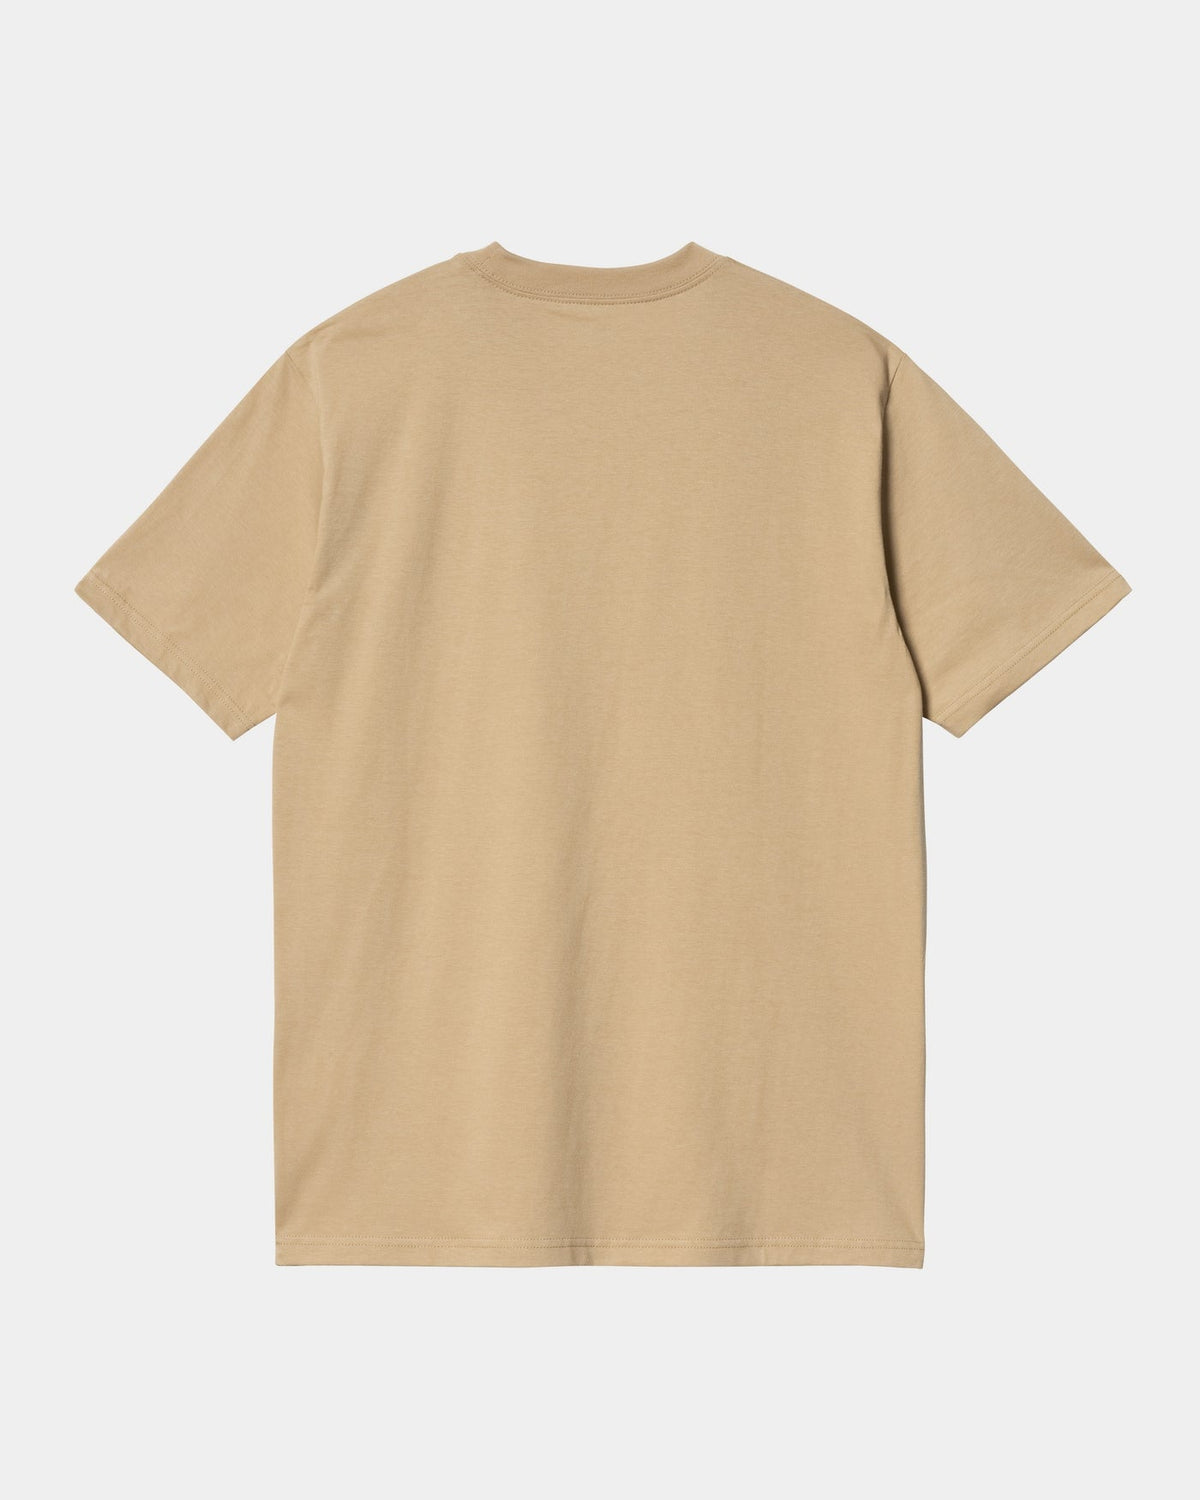 Palette T-Shirt in Sable